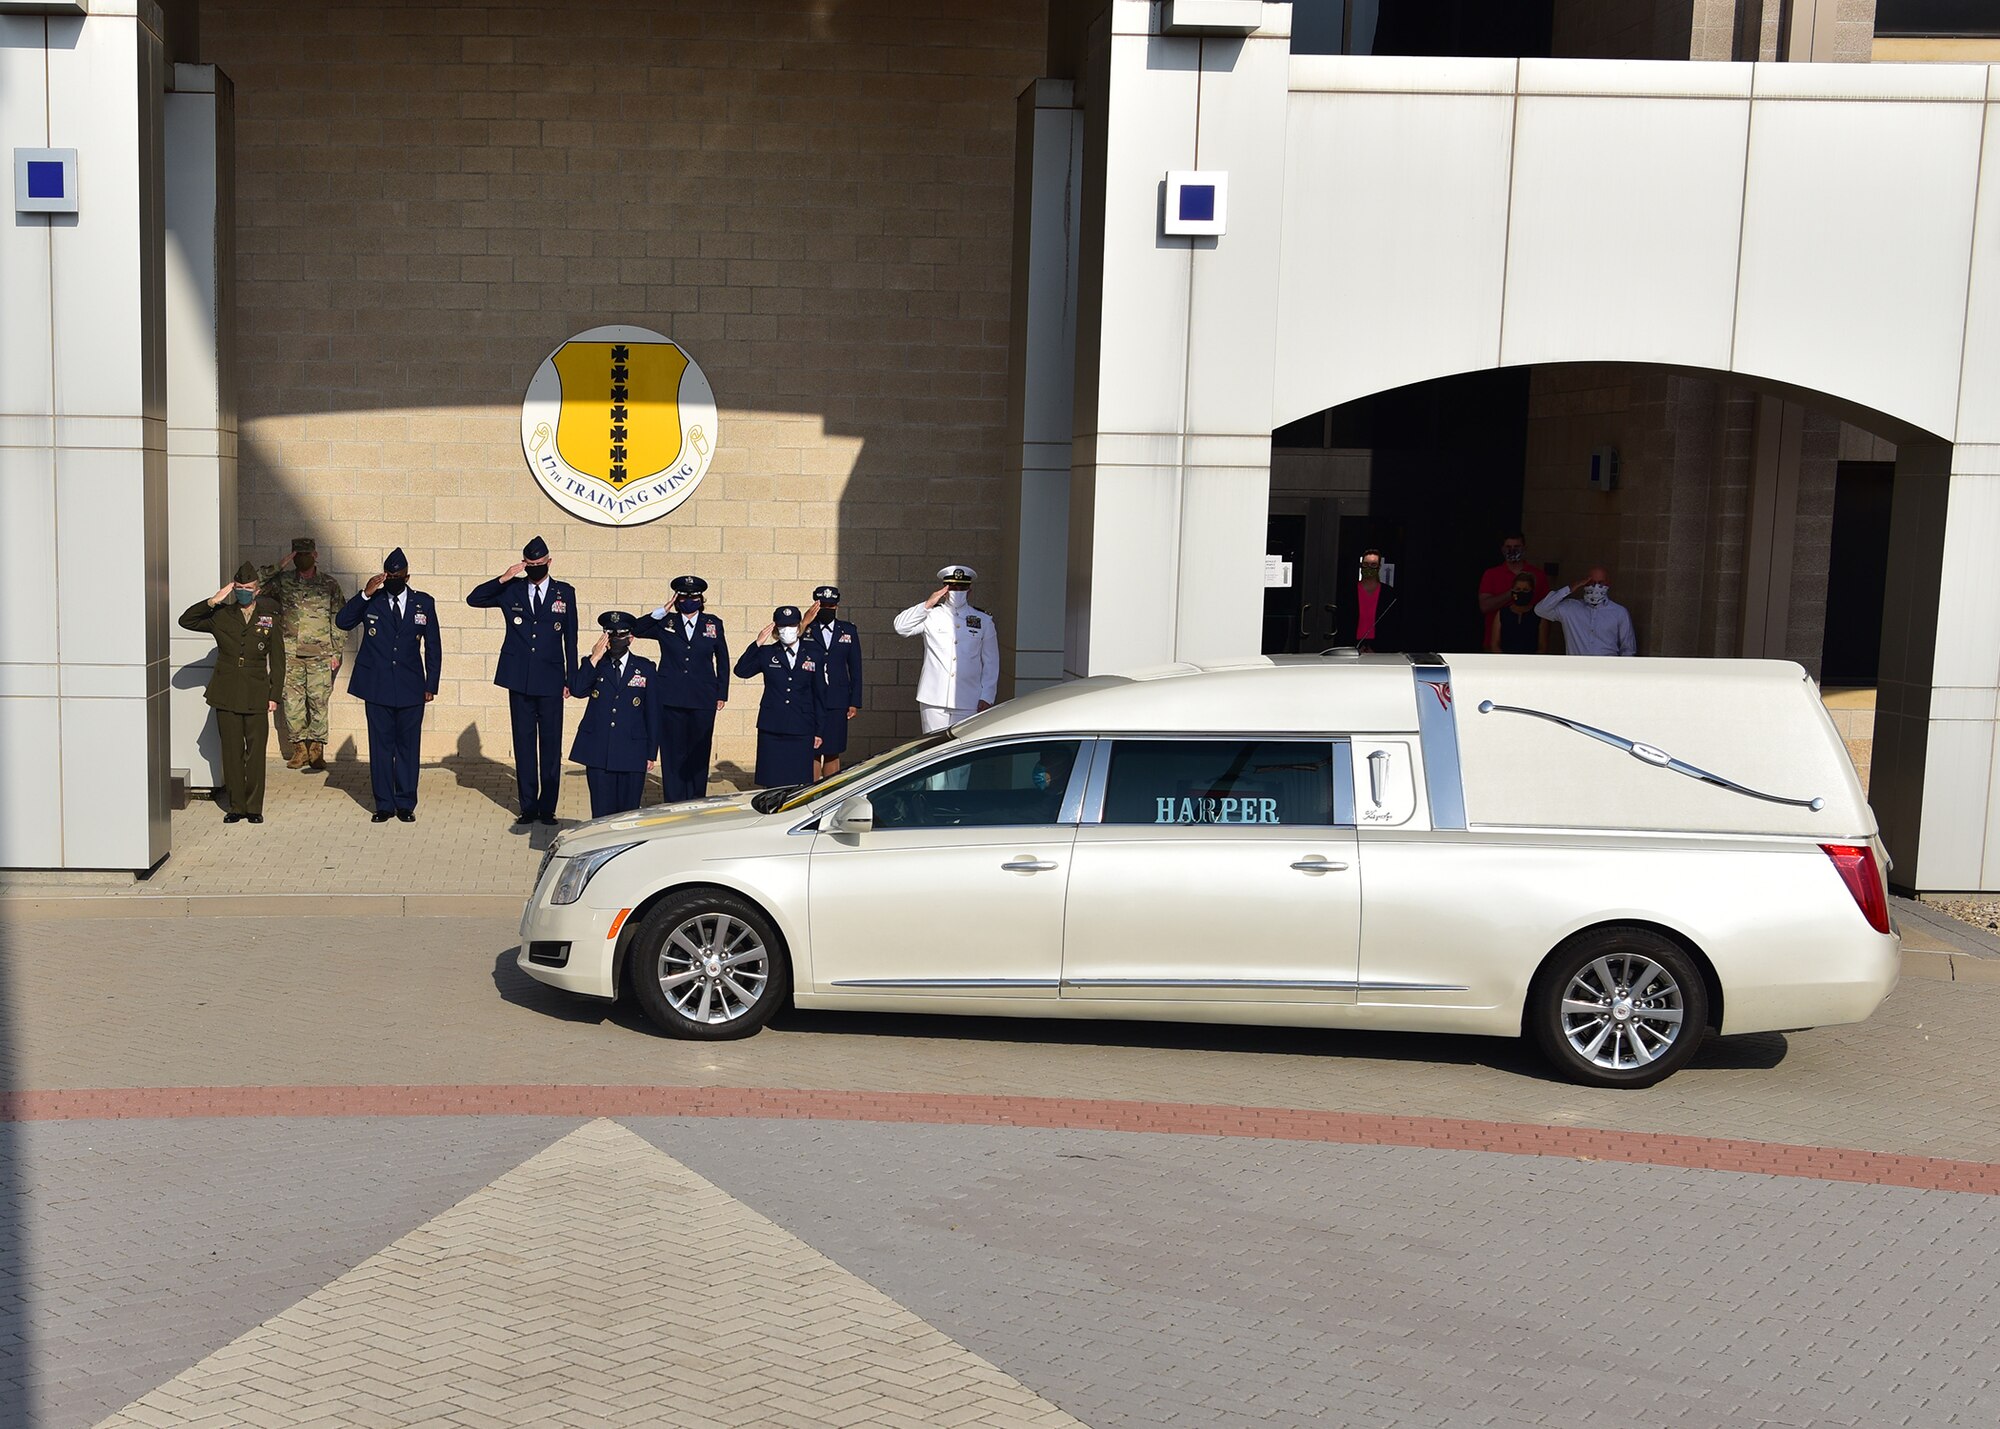 Goodfellow leadership pays respect as retired Col. Charles Powell’s casket leaves the Norma Brown building on Goodfellow Air Force Base, Texas July 8, 2020. Members from the different services came out to honor Powell for all he did at Goodfellow and San Angelo. (U.S. Air Force photo by Staff Sgt. Chad Warren)